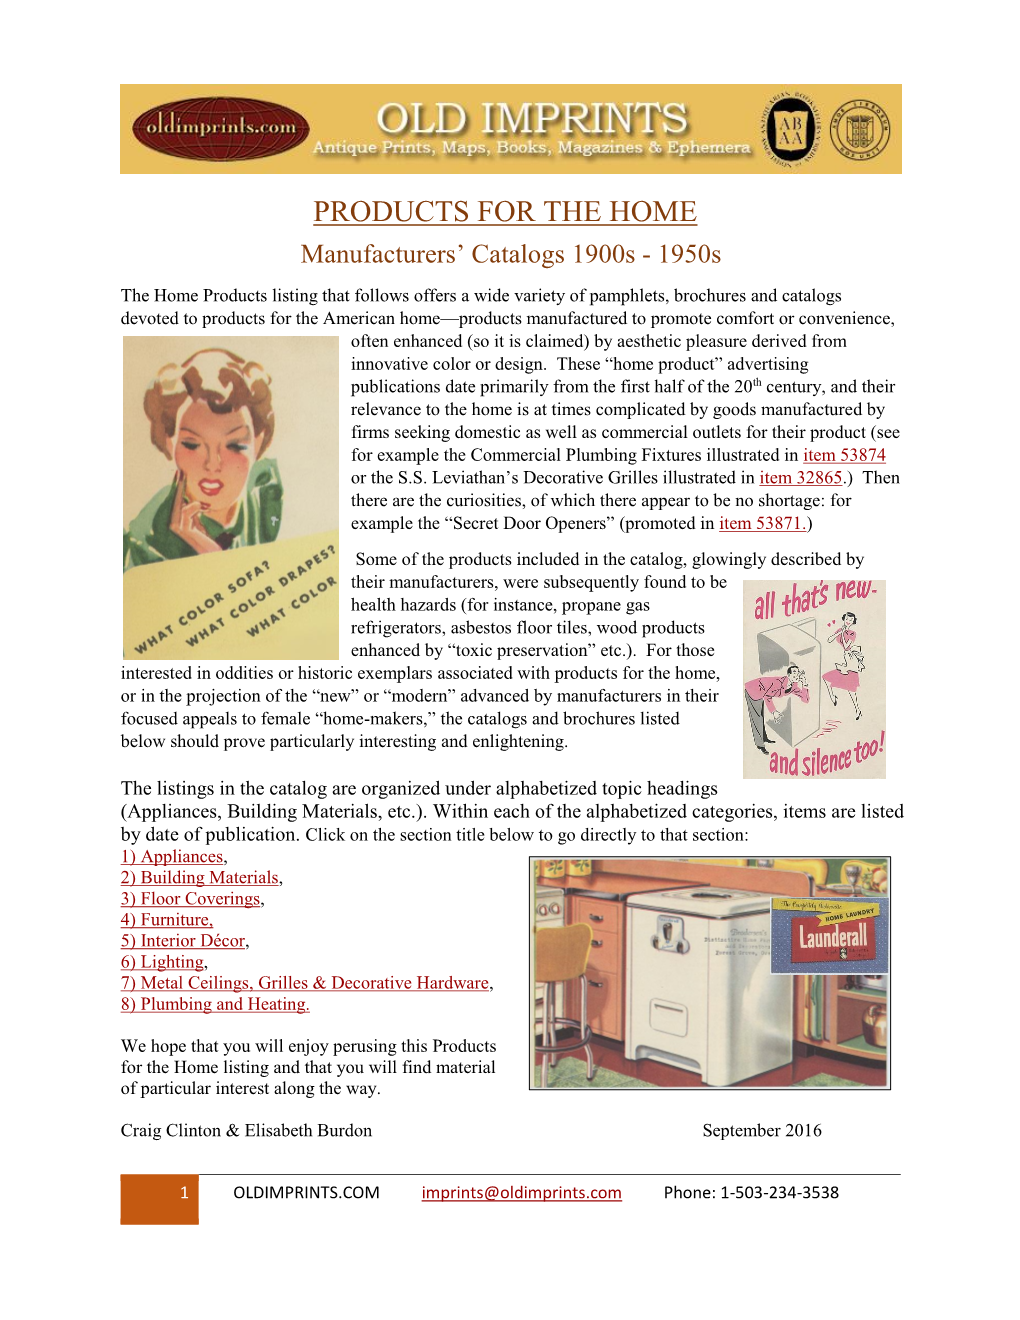 PRODUCTS for the HOME Manufacturers’ Catalogs 1900S - 1950S